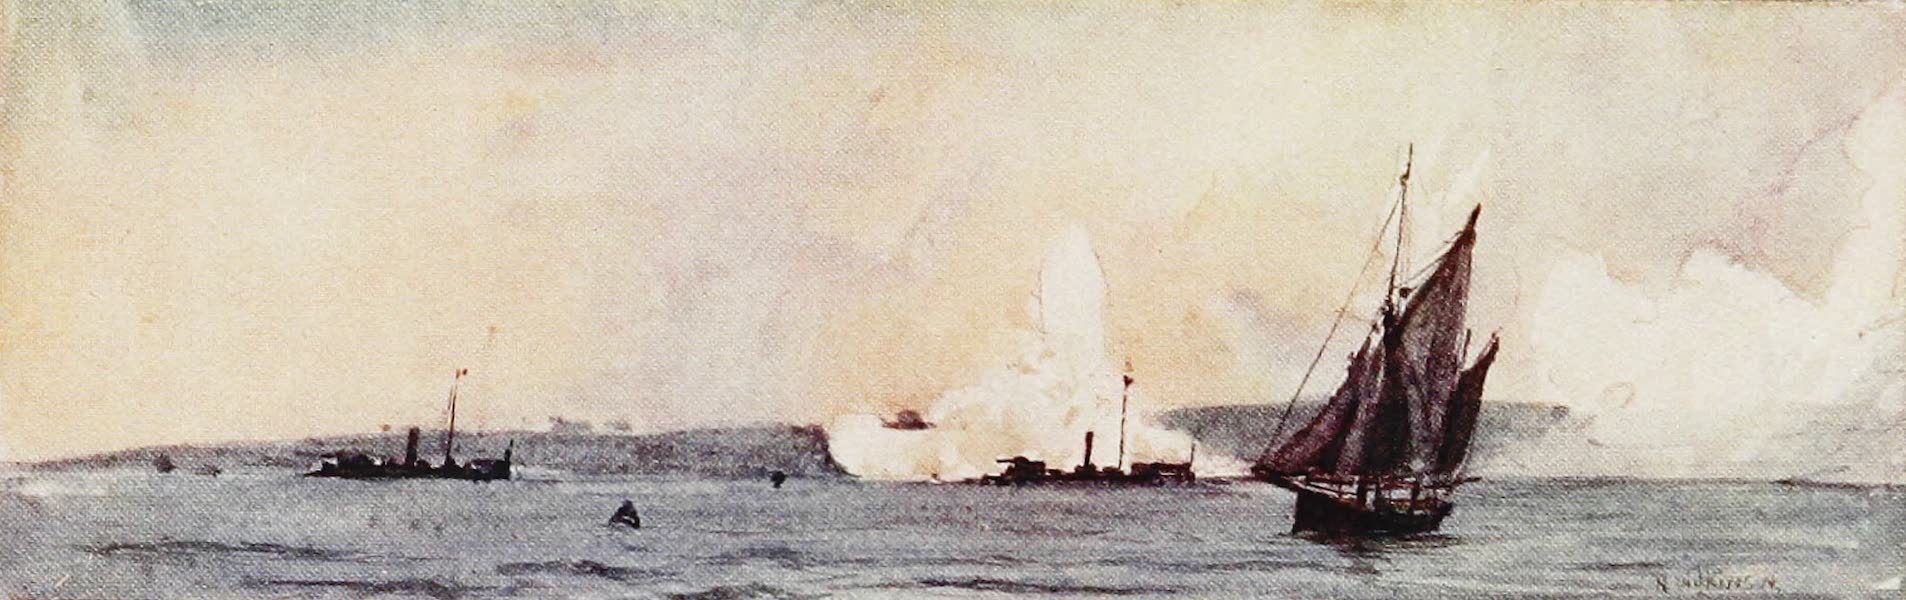 The Royal Navy, Painted and Described - Gunboats practising at Spithead (1907)